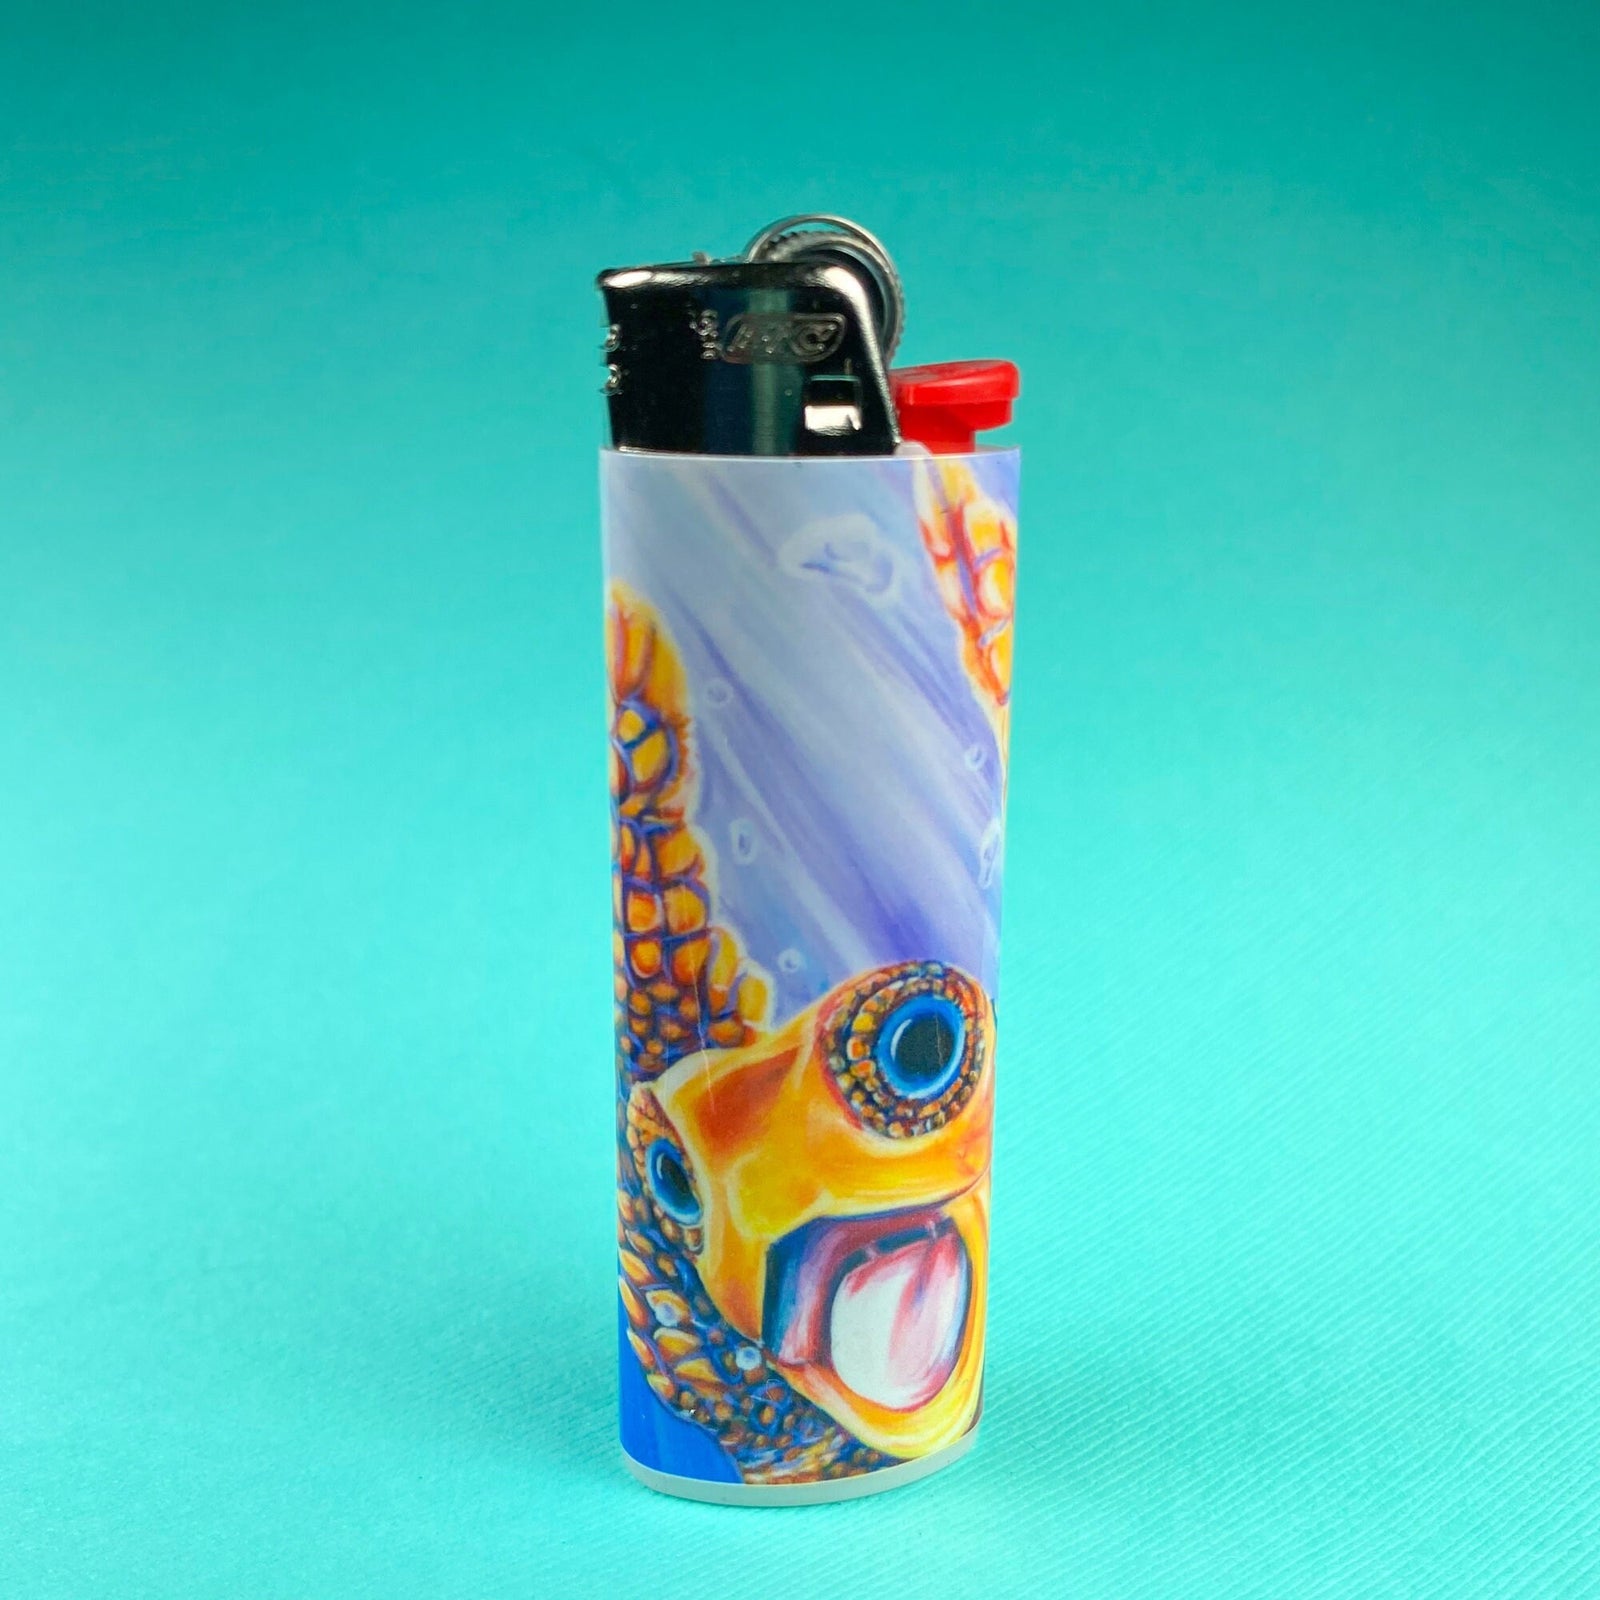 cannabis, lighters, accessories